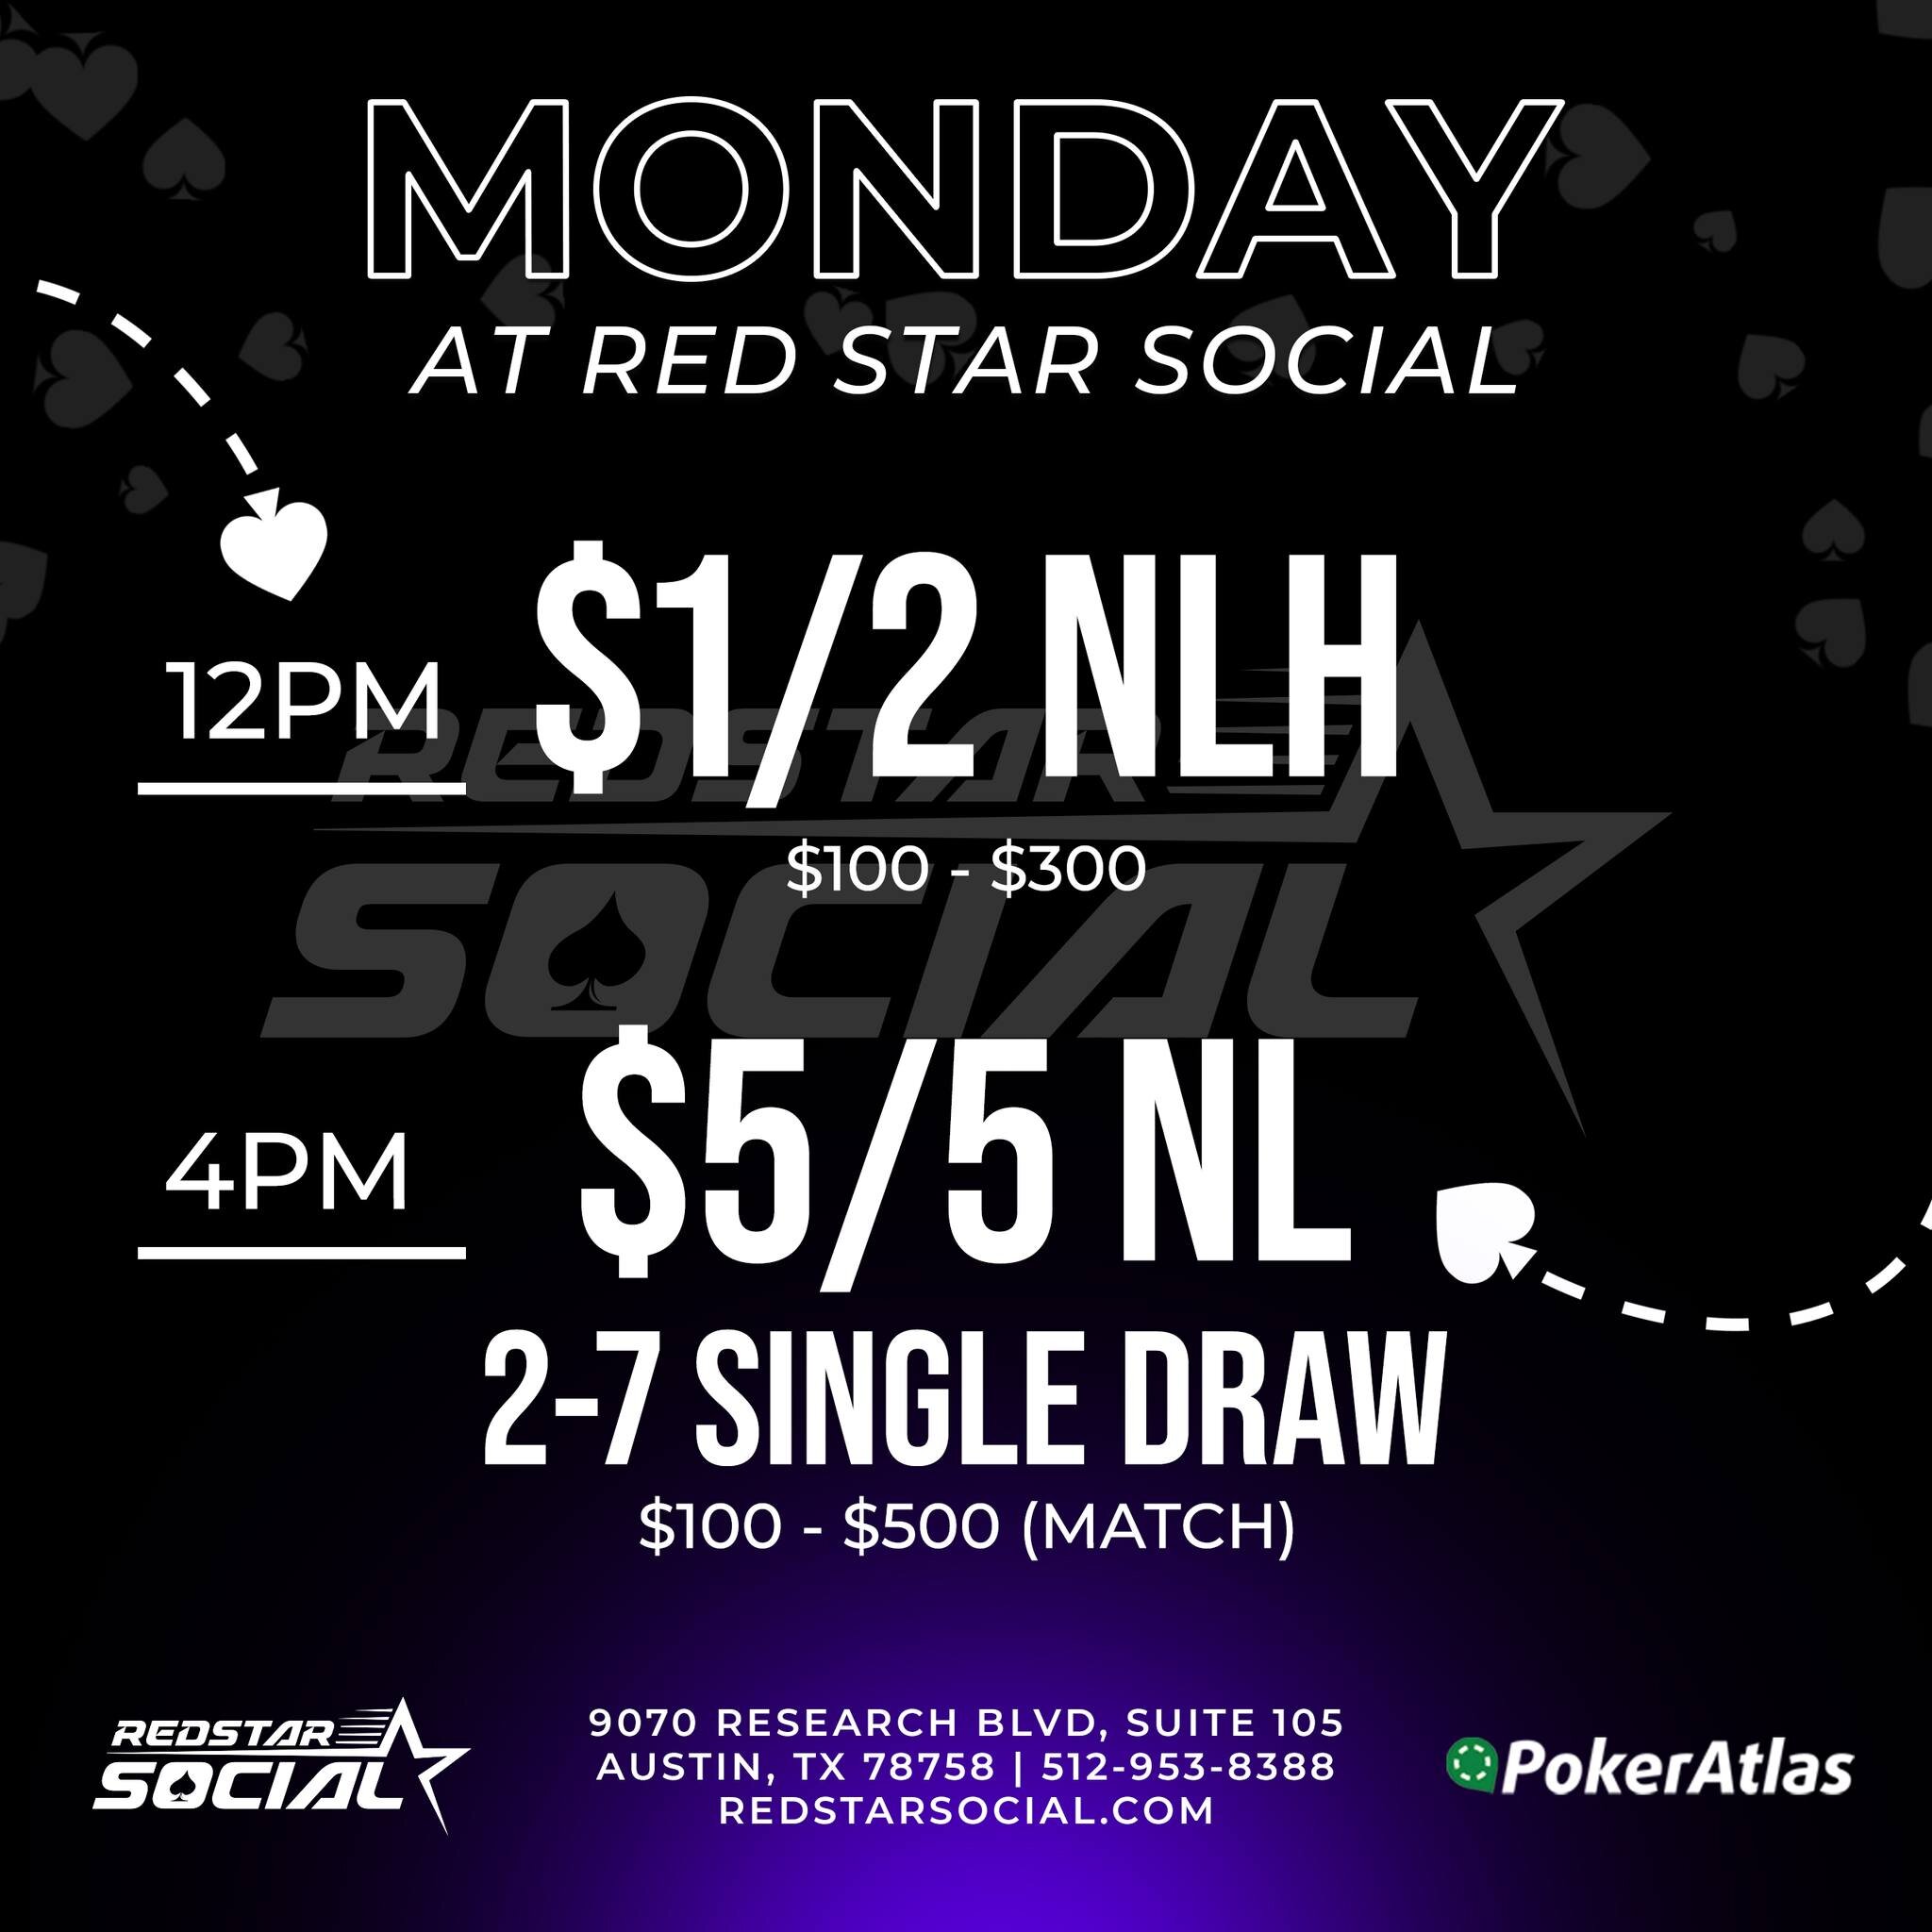 Spreading NLH and 2-7 Single Draw today. Doors open at noon.

&diams;️ 12pm: $1/2 NLH w/bomb pots $100 - $300 (Max)
&spades;️ 4pm: Monday $5/5 NL 2-7 Single Draw $100 - $500 (Match)

The exciting sweepstakes machines are in &quot;The Gameroom&quot;. 